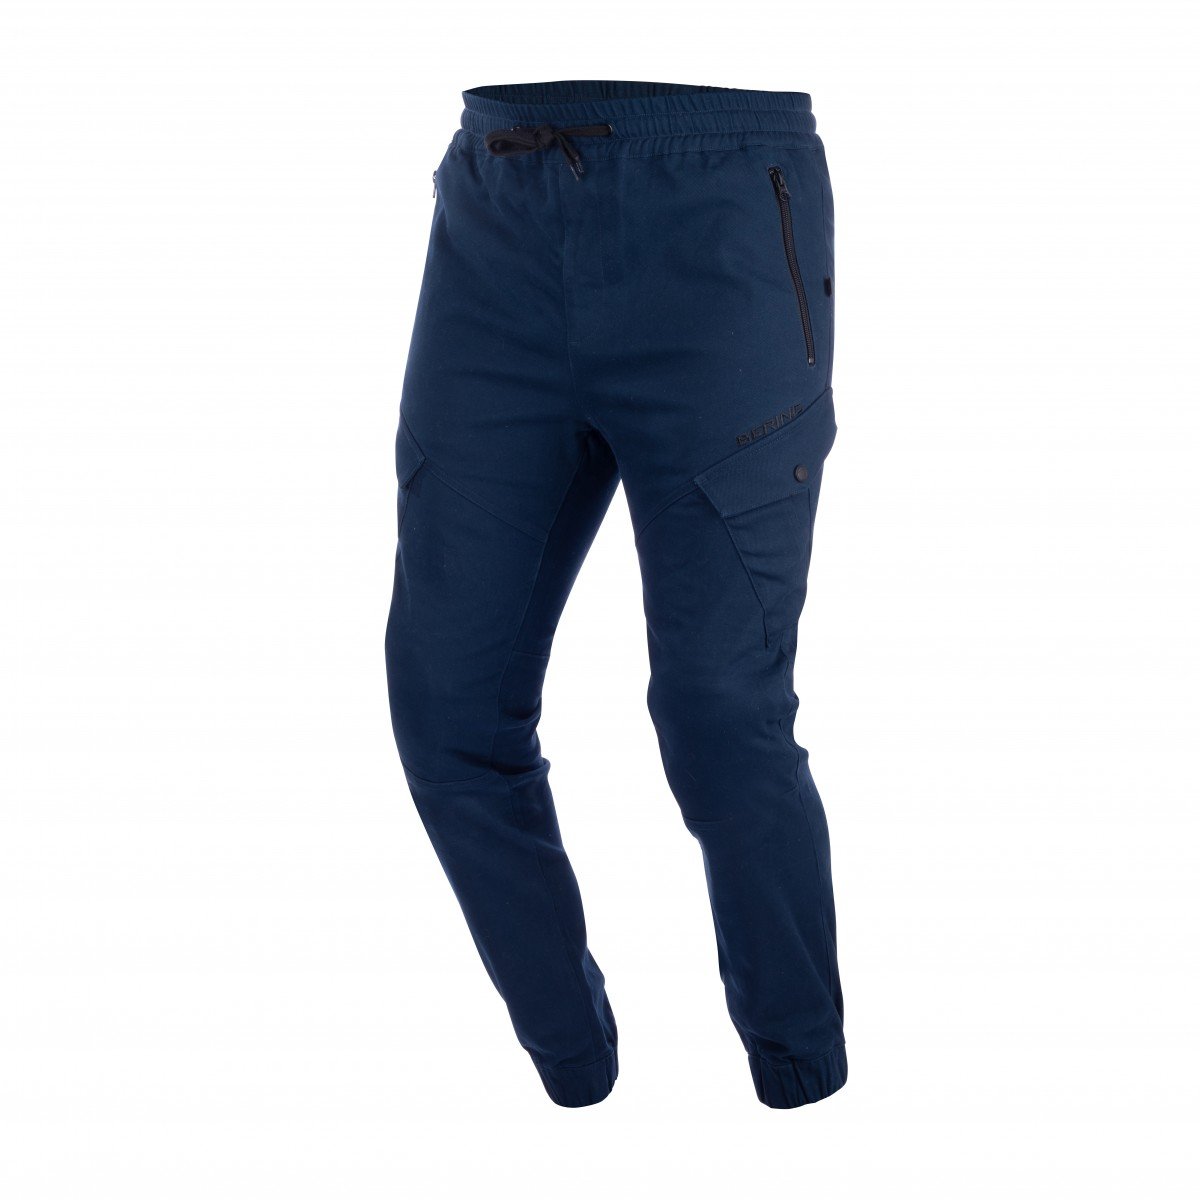 Image of Bering Trousers Richie Navy Blue Size 2XL ID 3660815167823